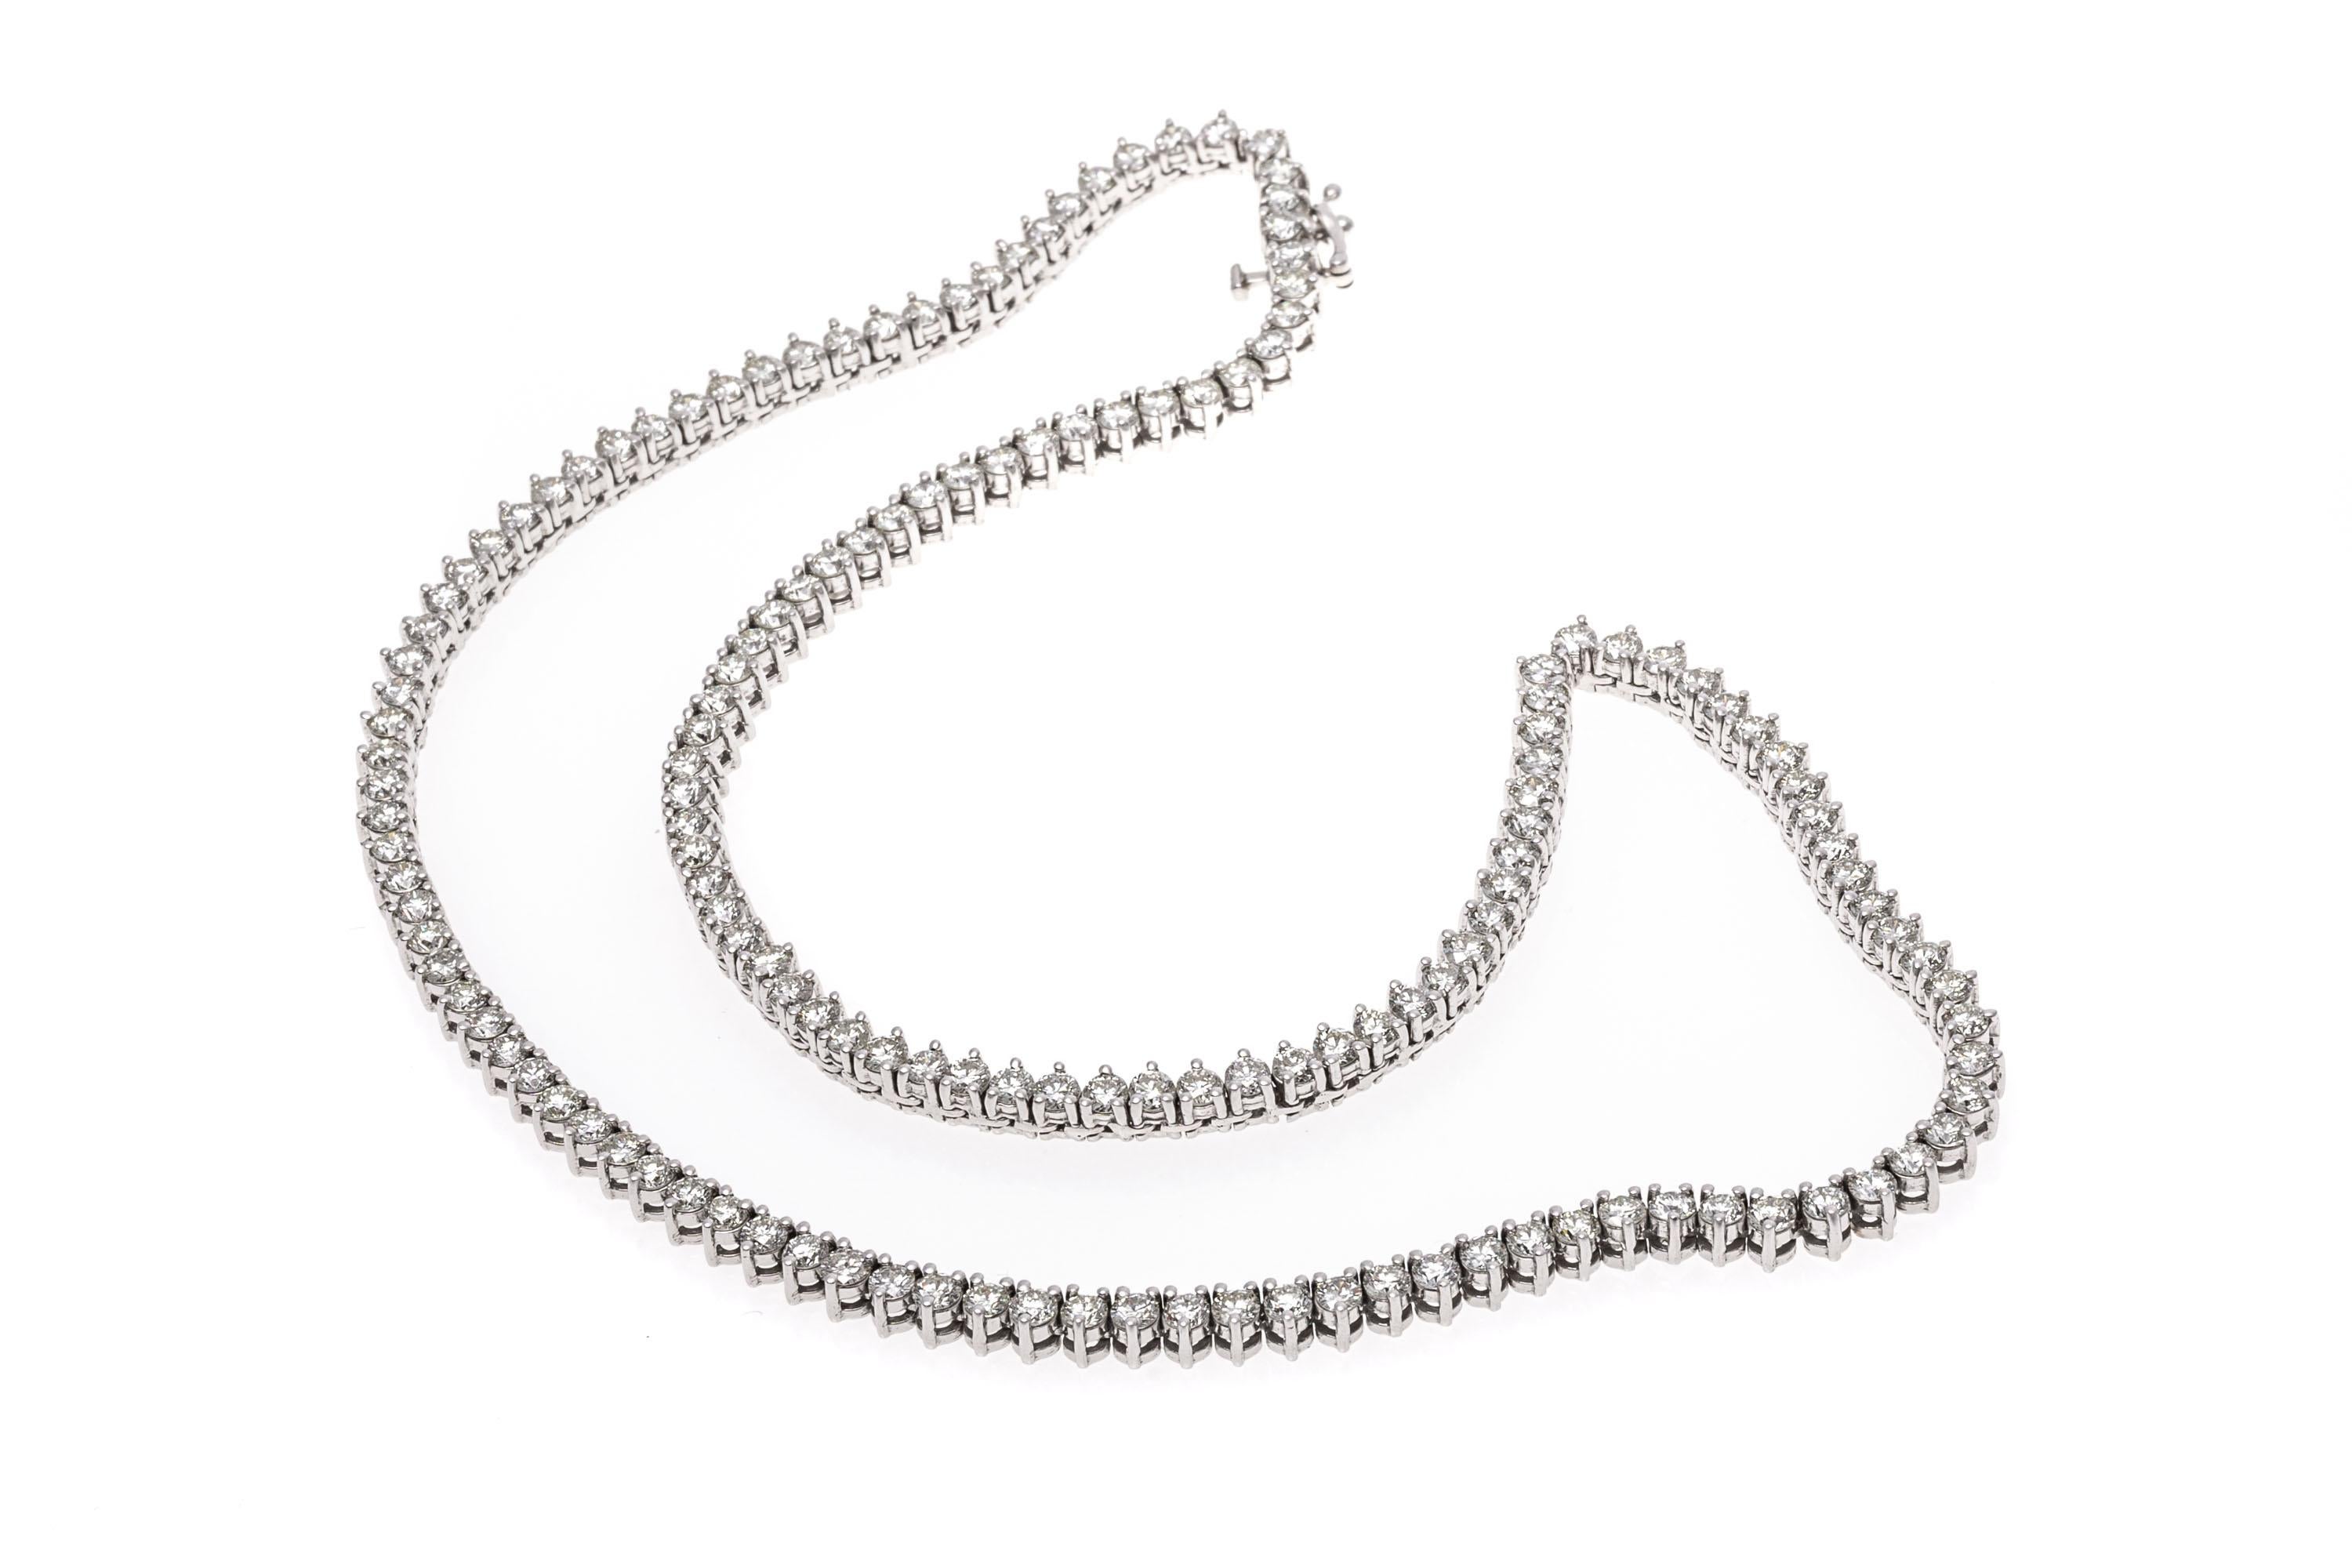 14k White Gold Brilliant Cut Diamond Line Necklace, Approximately 11.32 TCW For Sale 2